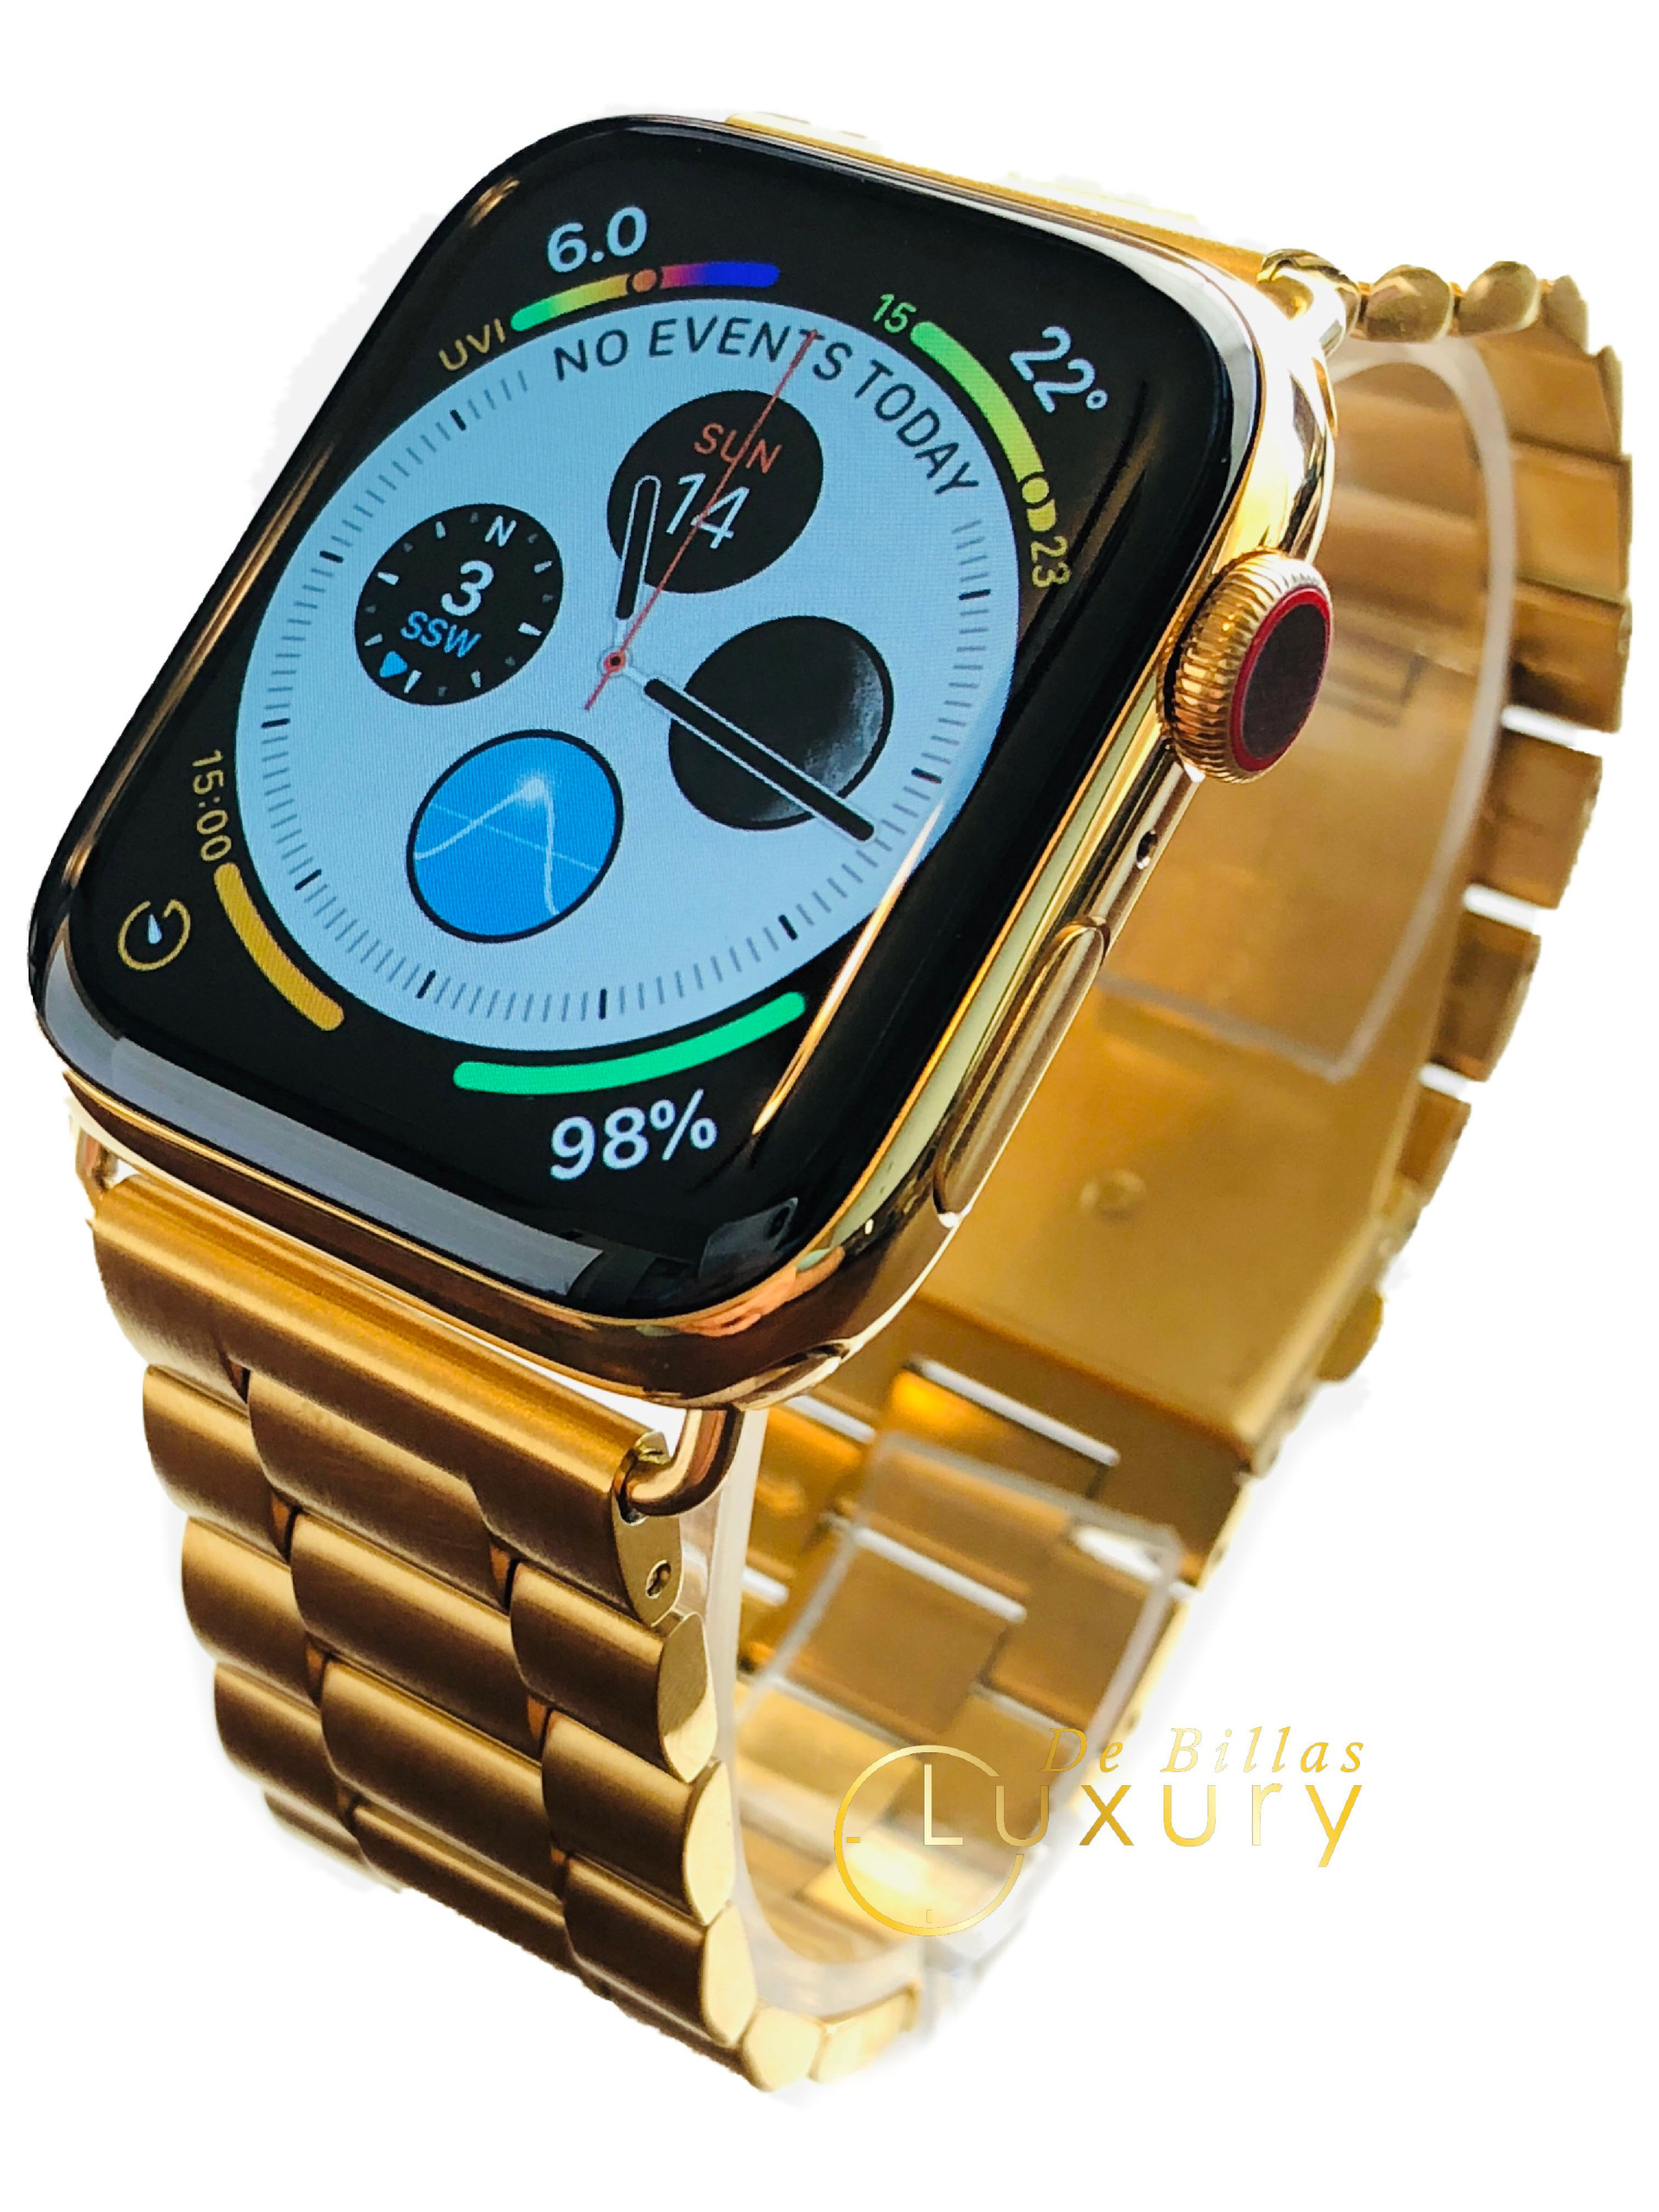 24K Gold 44MM Apple Watch SERIES 4 with 